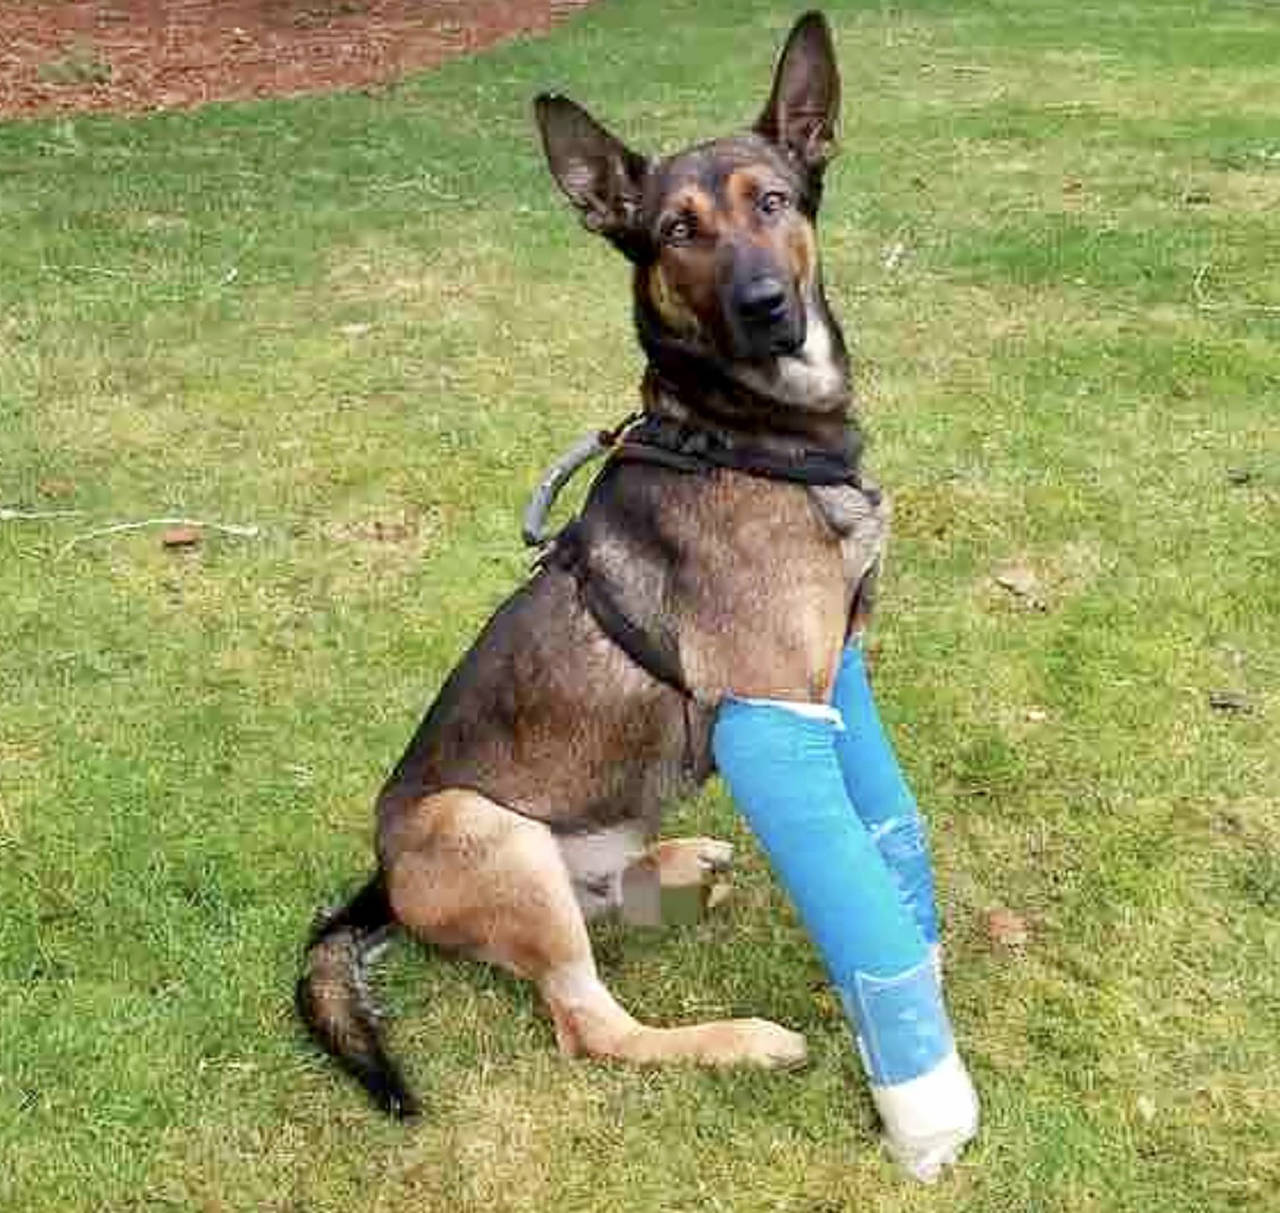 Rex, a Snohomish County Sheriff's canine, was injured in a training accident and faces a long recovery. (Submitted photo)